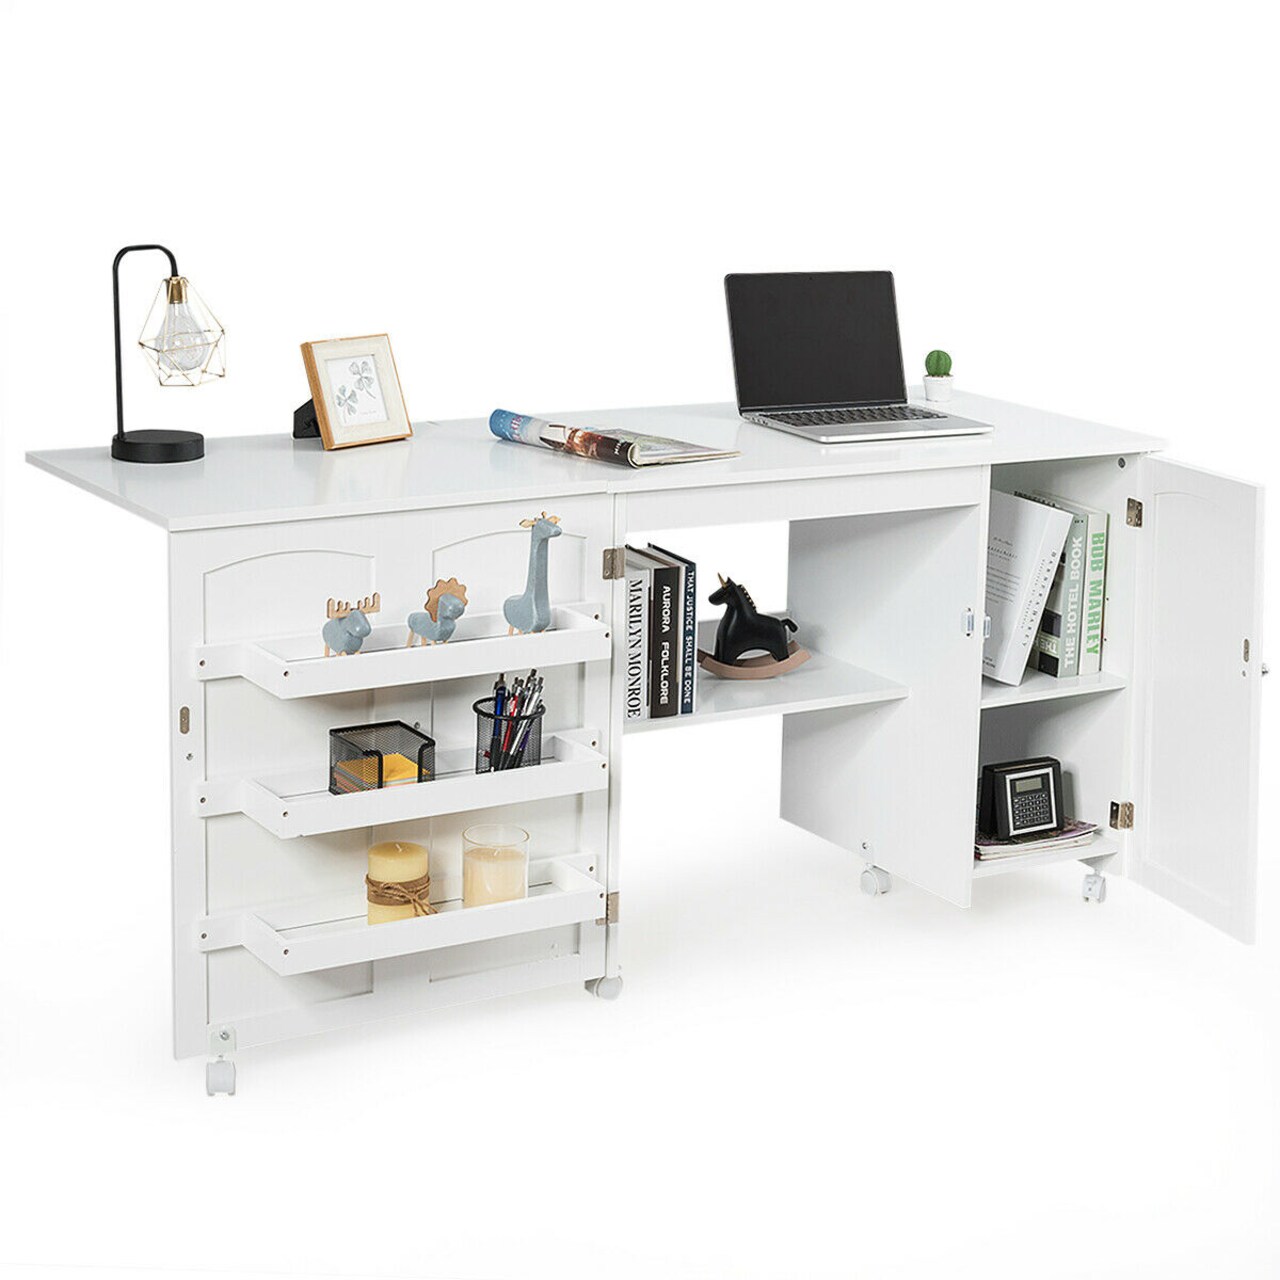  Craft Table With Storage